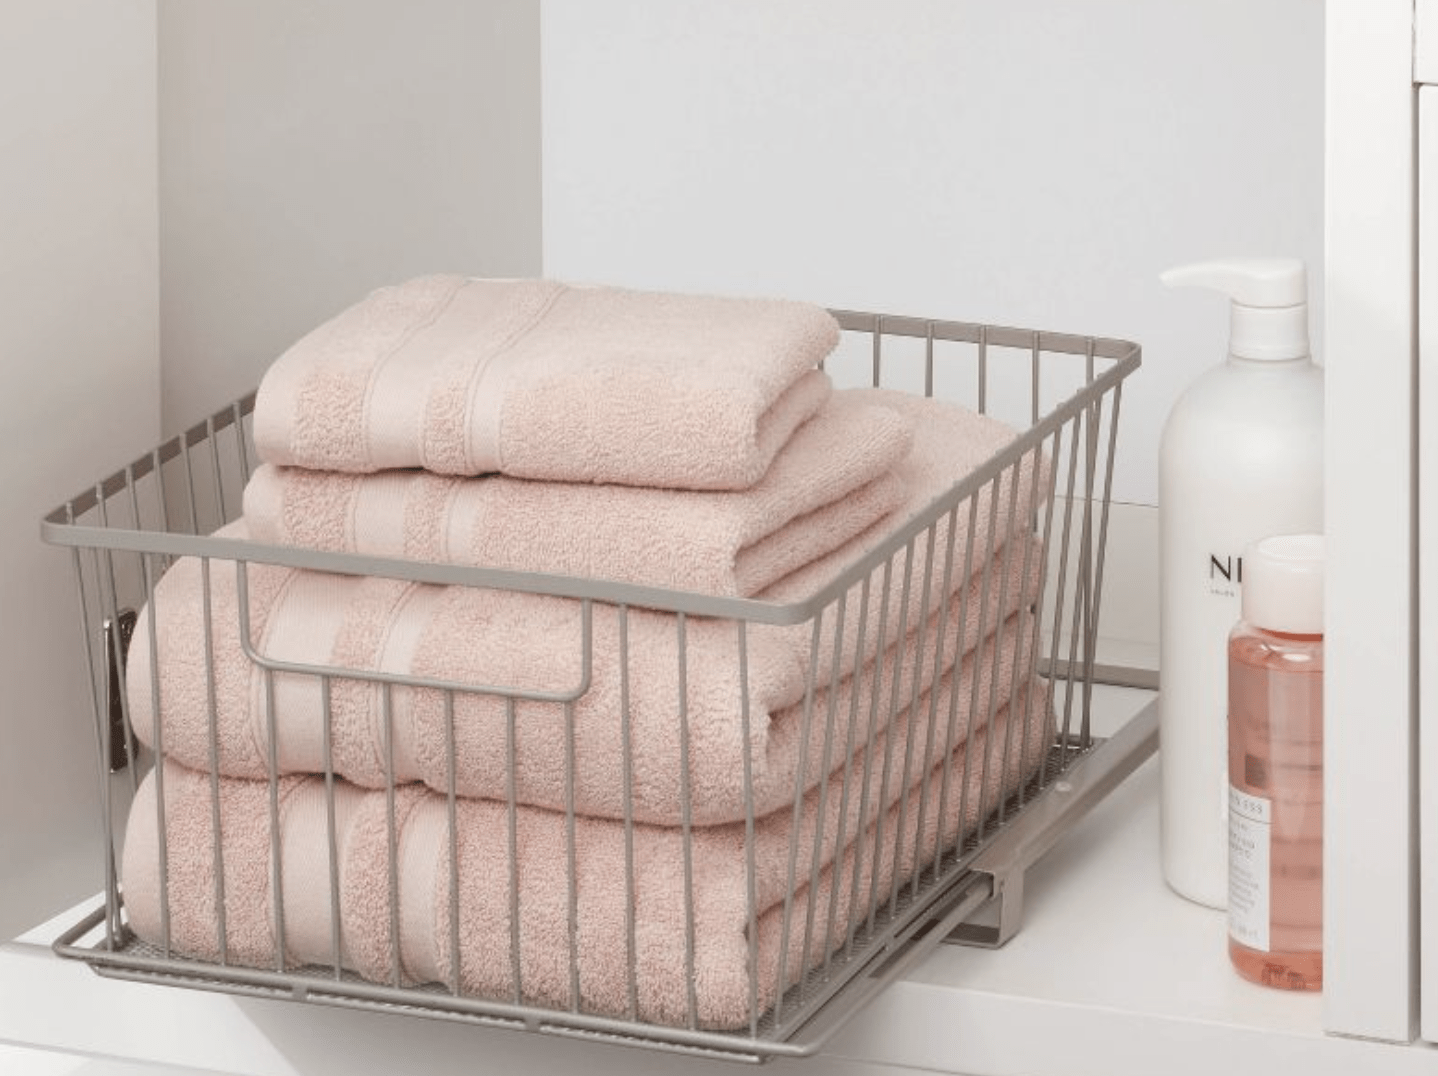 pink towels folded in open drawer inside bathroom closet next to shampoo